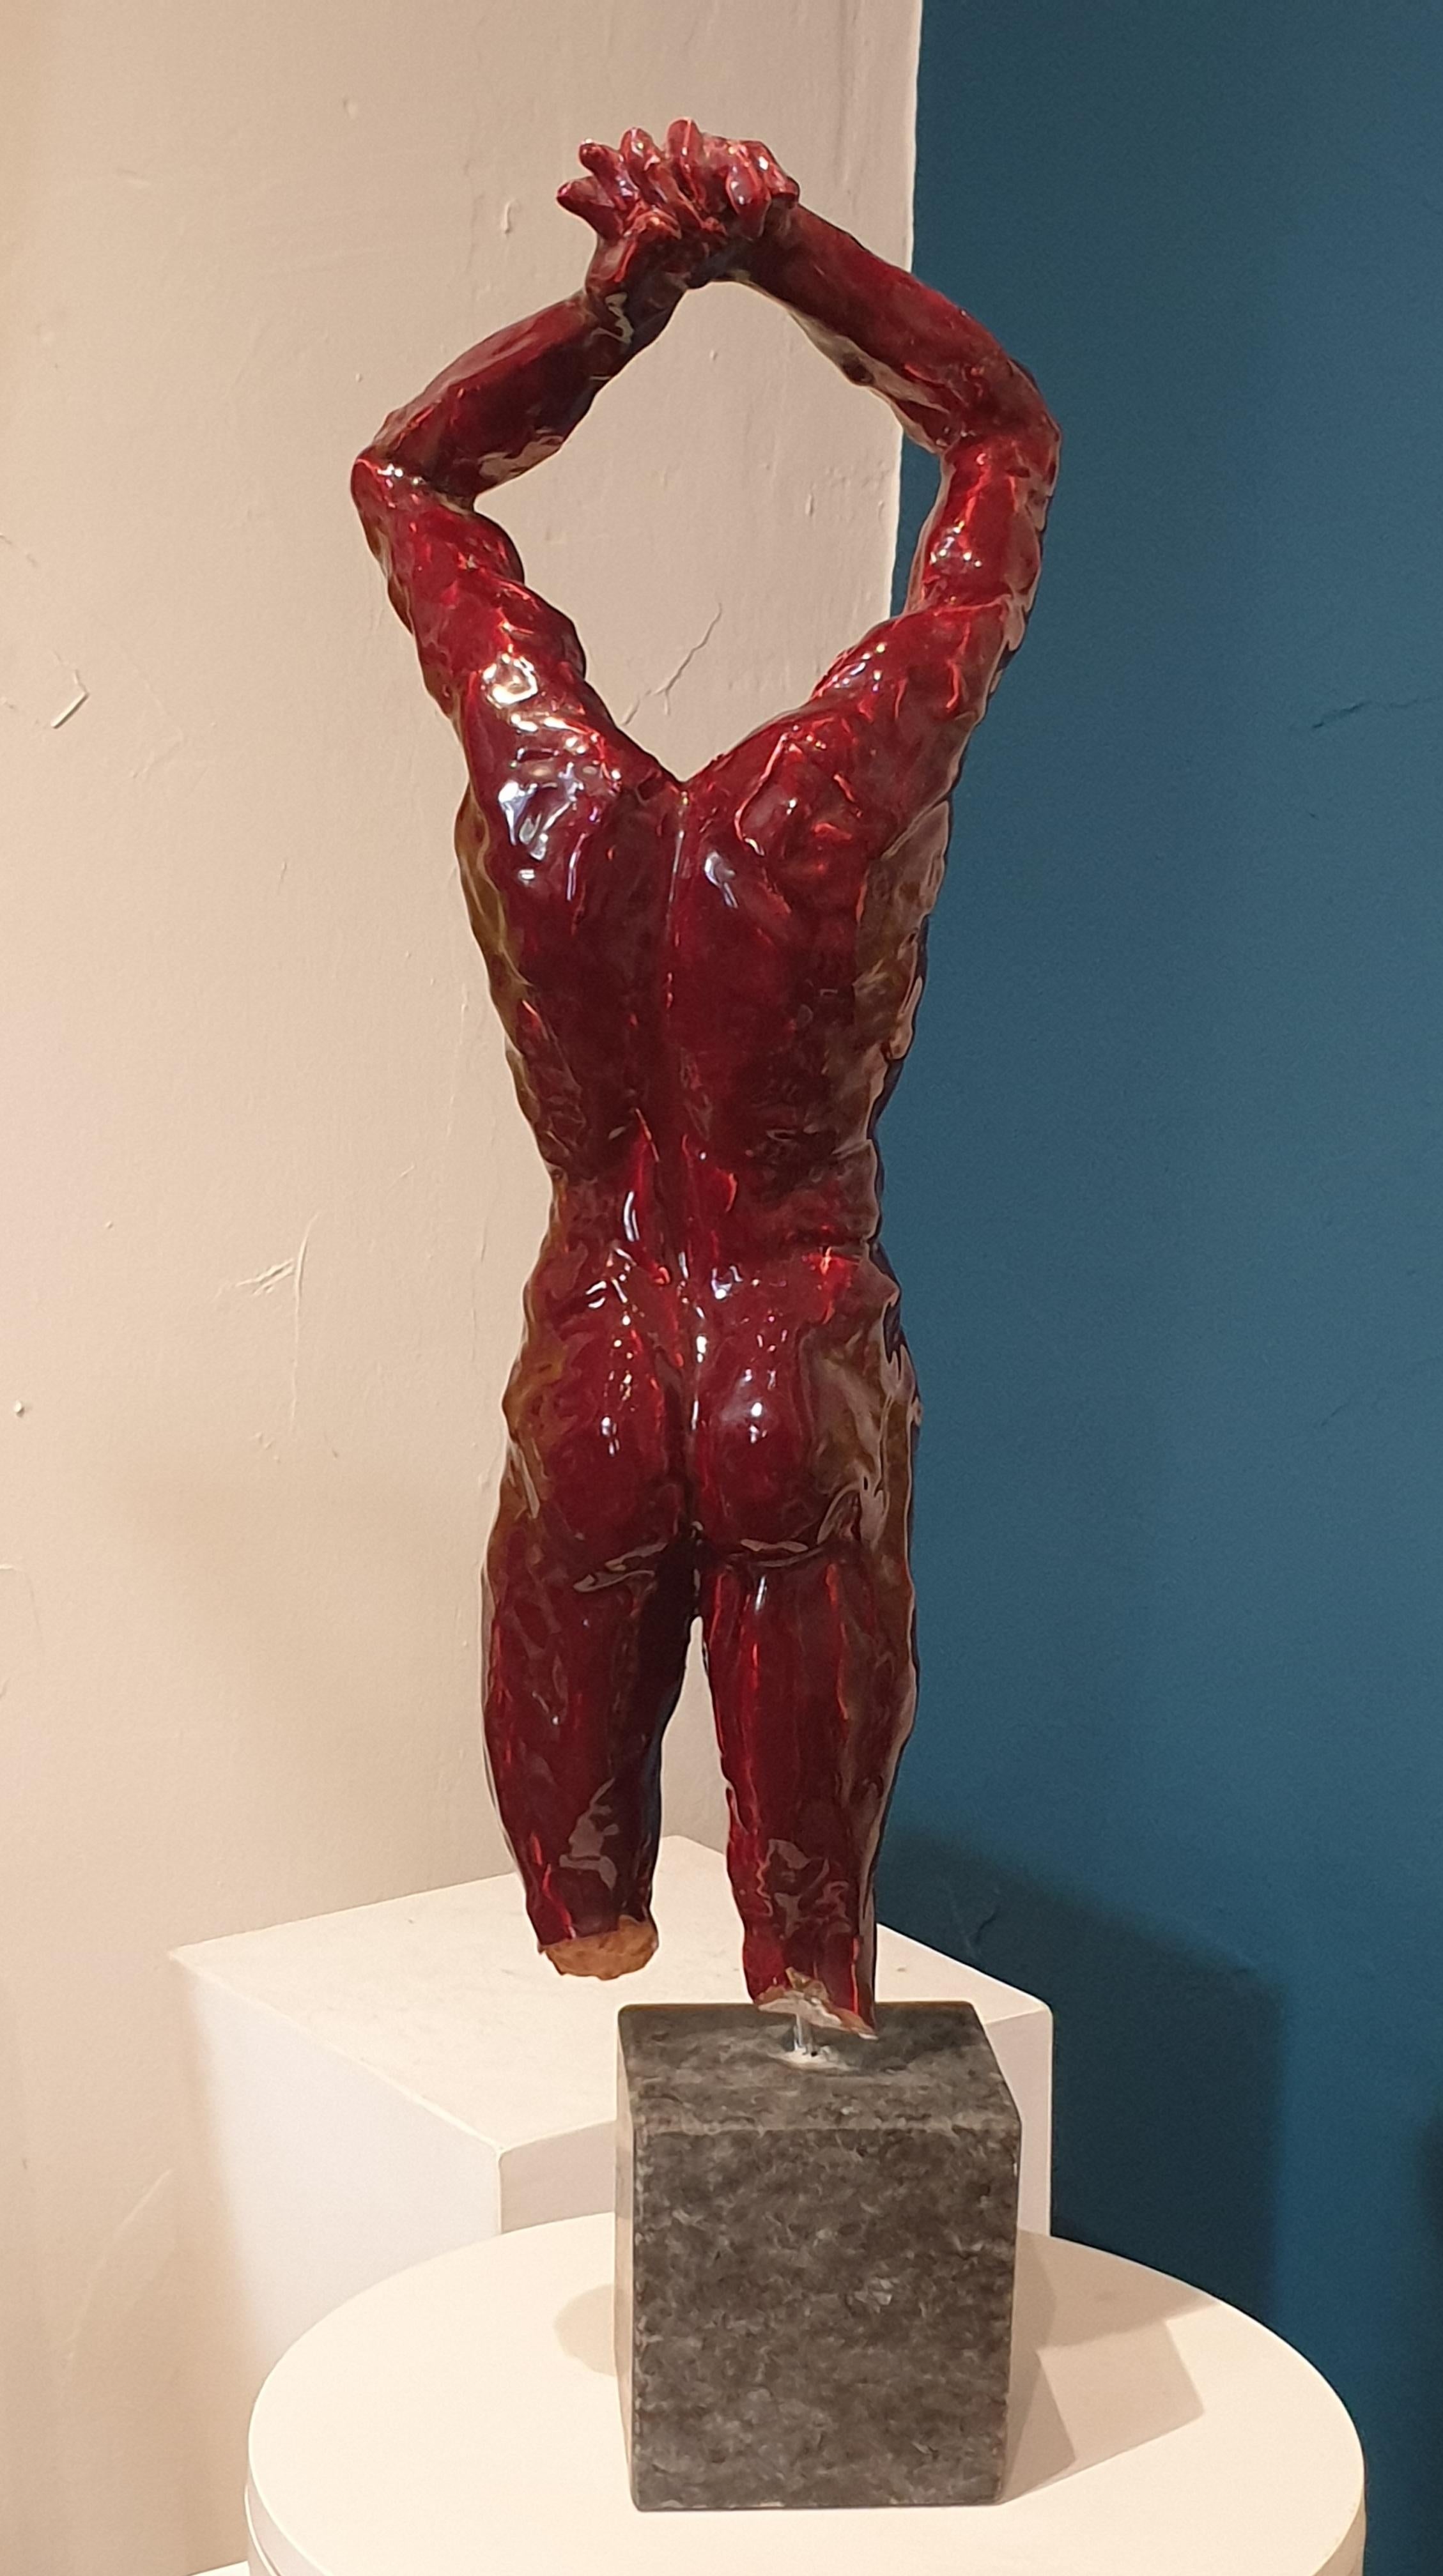 French Mid 20th Century ceramic figure of a man in Sang de Boeuf, oxblood red, glaze presented on a metal 'tige' and marble base.

The sculpture is not signed but was purchased from Nice, France, in the 1970s as a work by 'Franta'. it is however